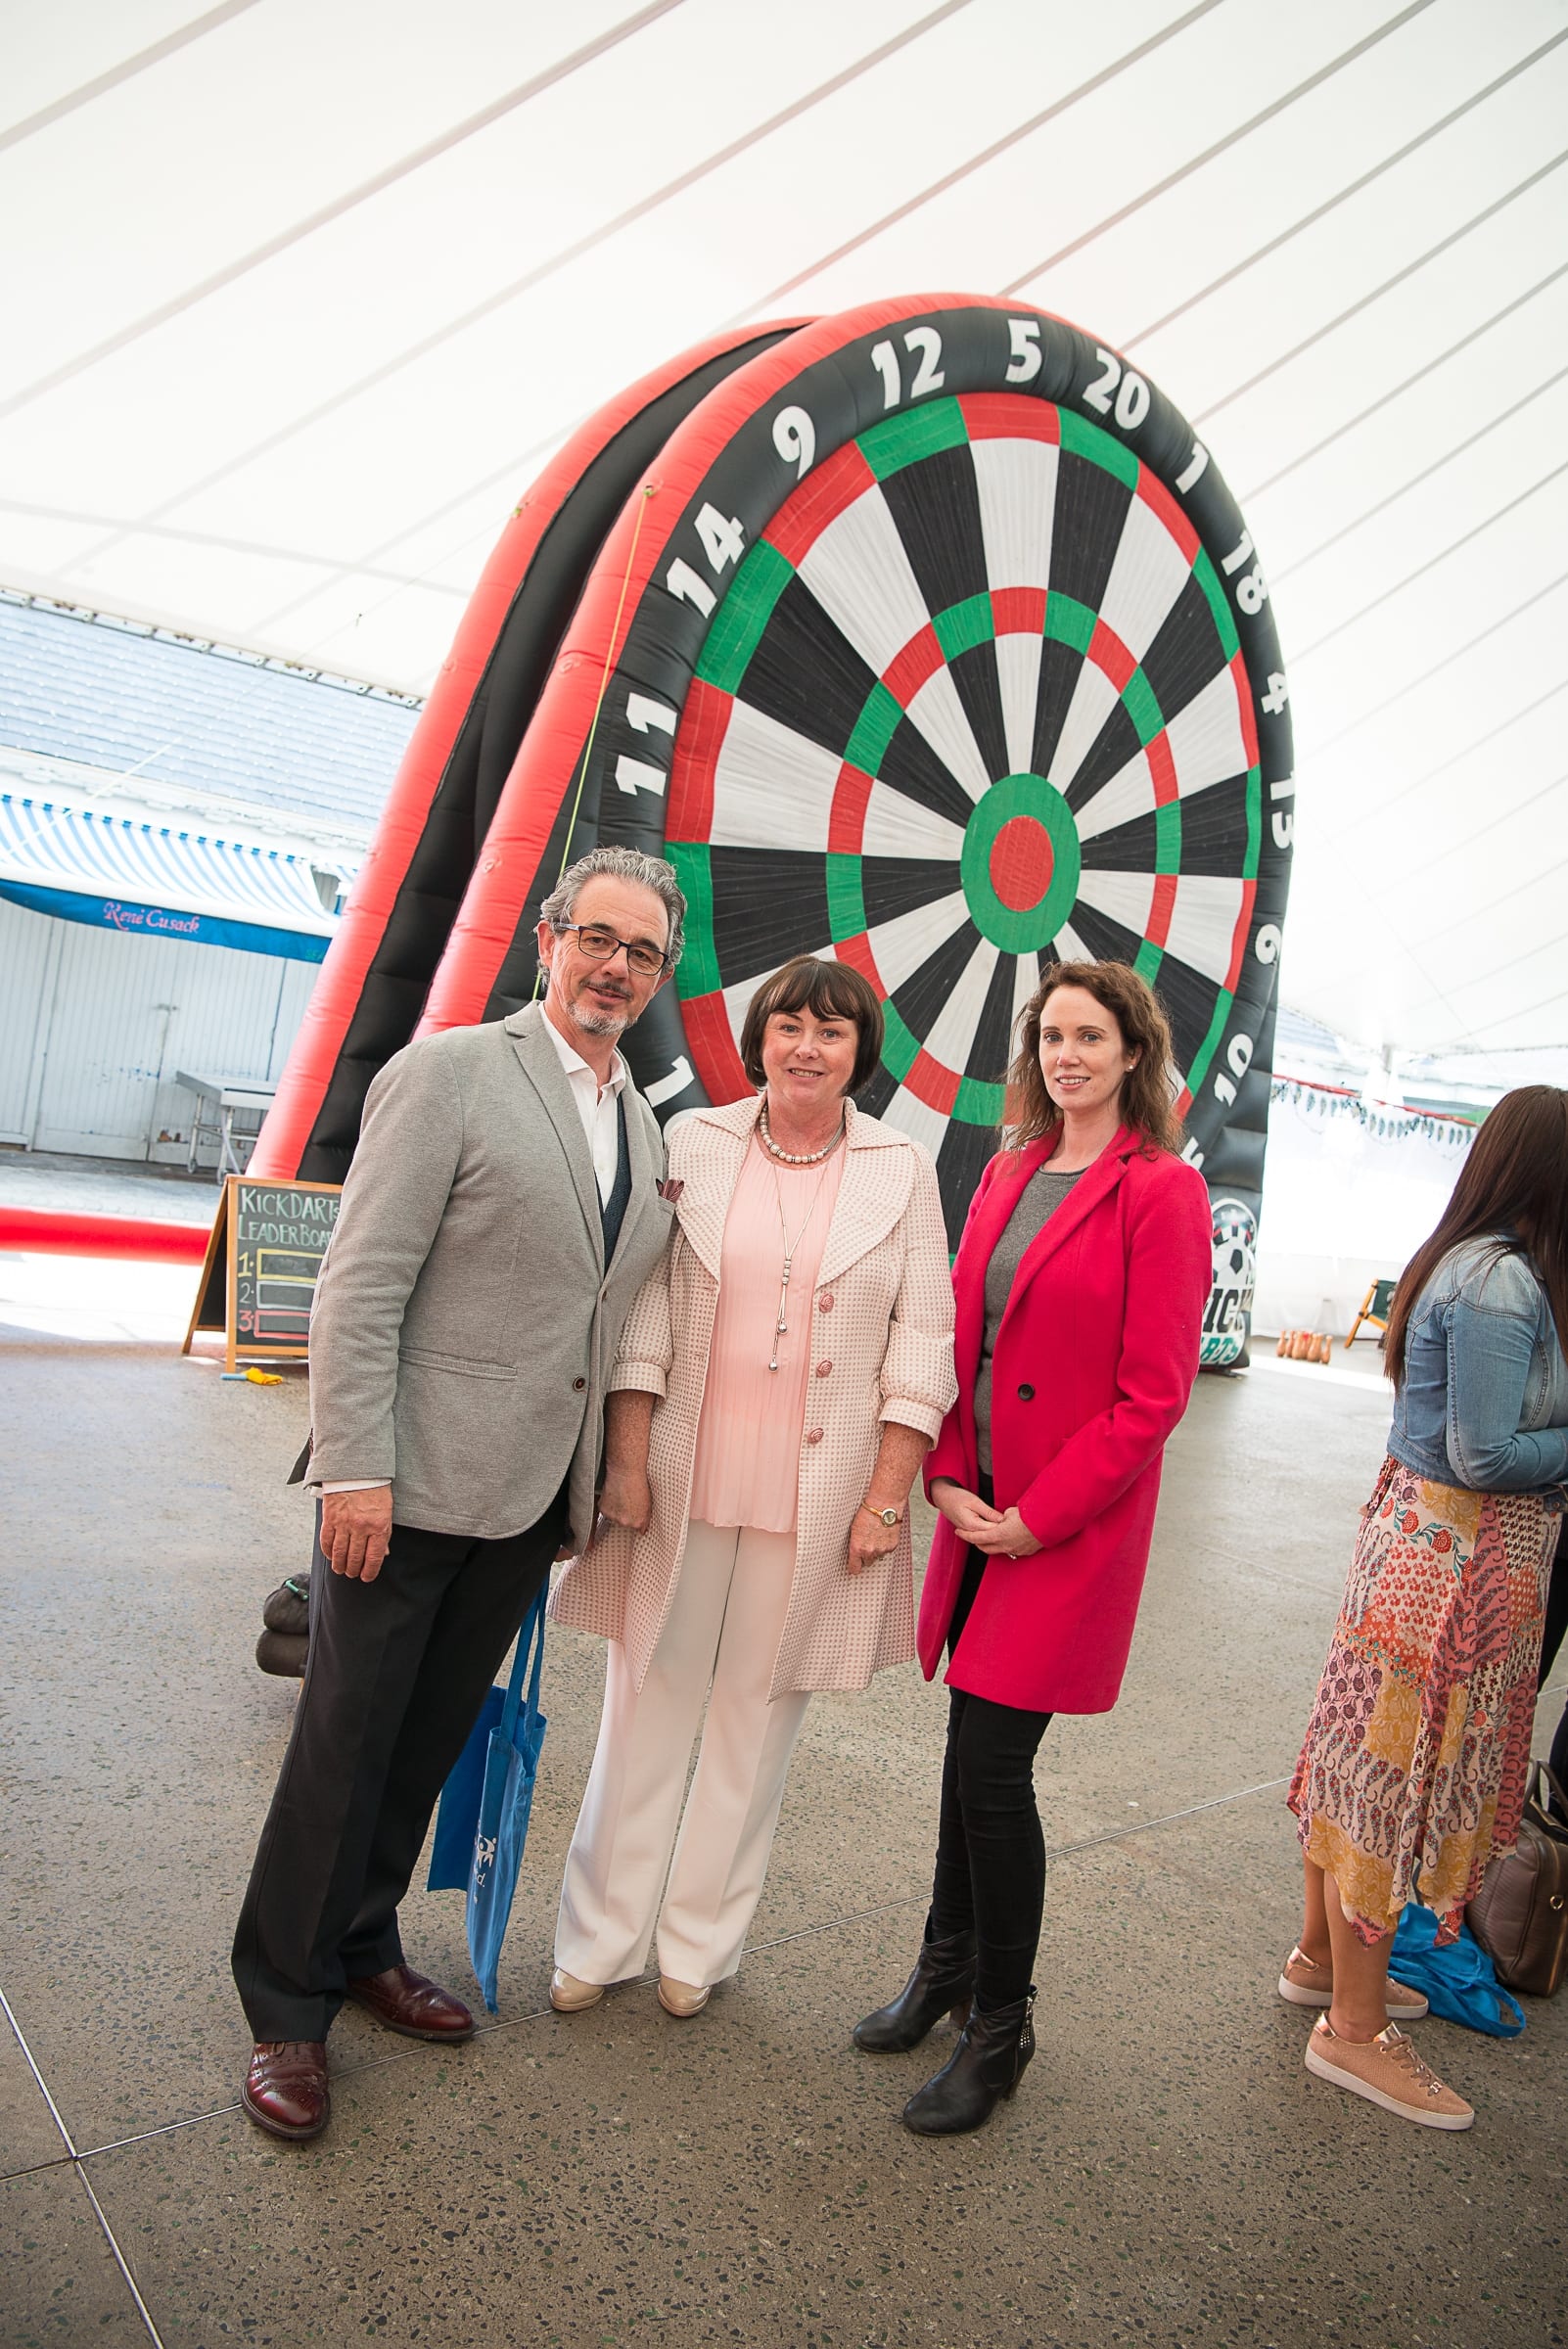 From Left to Right:  Regional Leaders BBQ which took place on the 6th June in the Limerick Milk Market:Colm O’Brien - Carambola, Caroline Long - CEO / Limerick and  District Credit Union, Mary McNamee- Limerick Chamber. 
Photo by Morning Star Photography